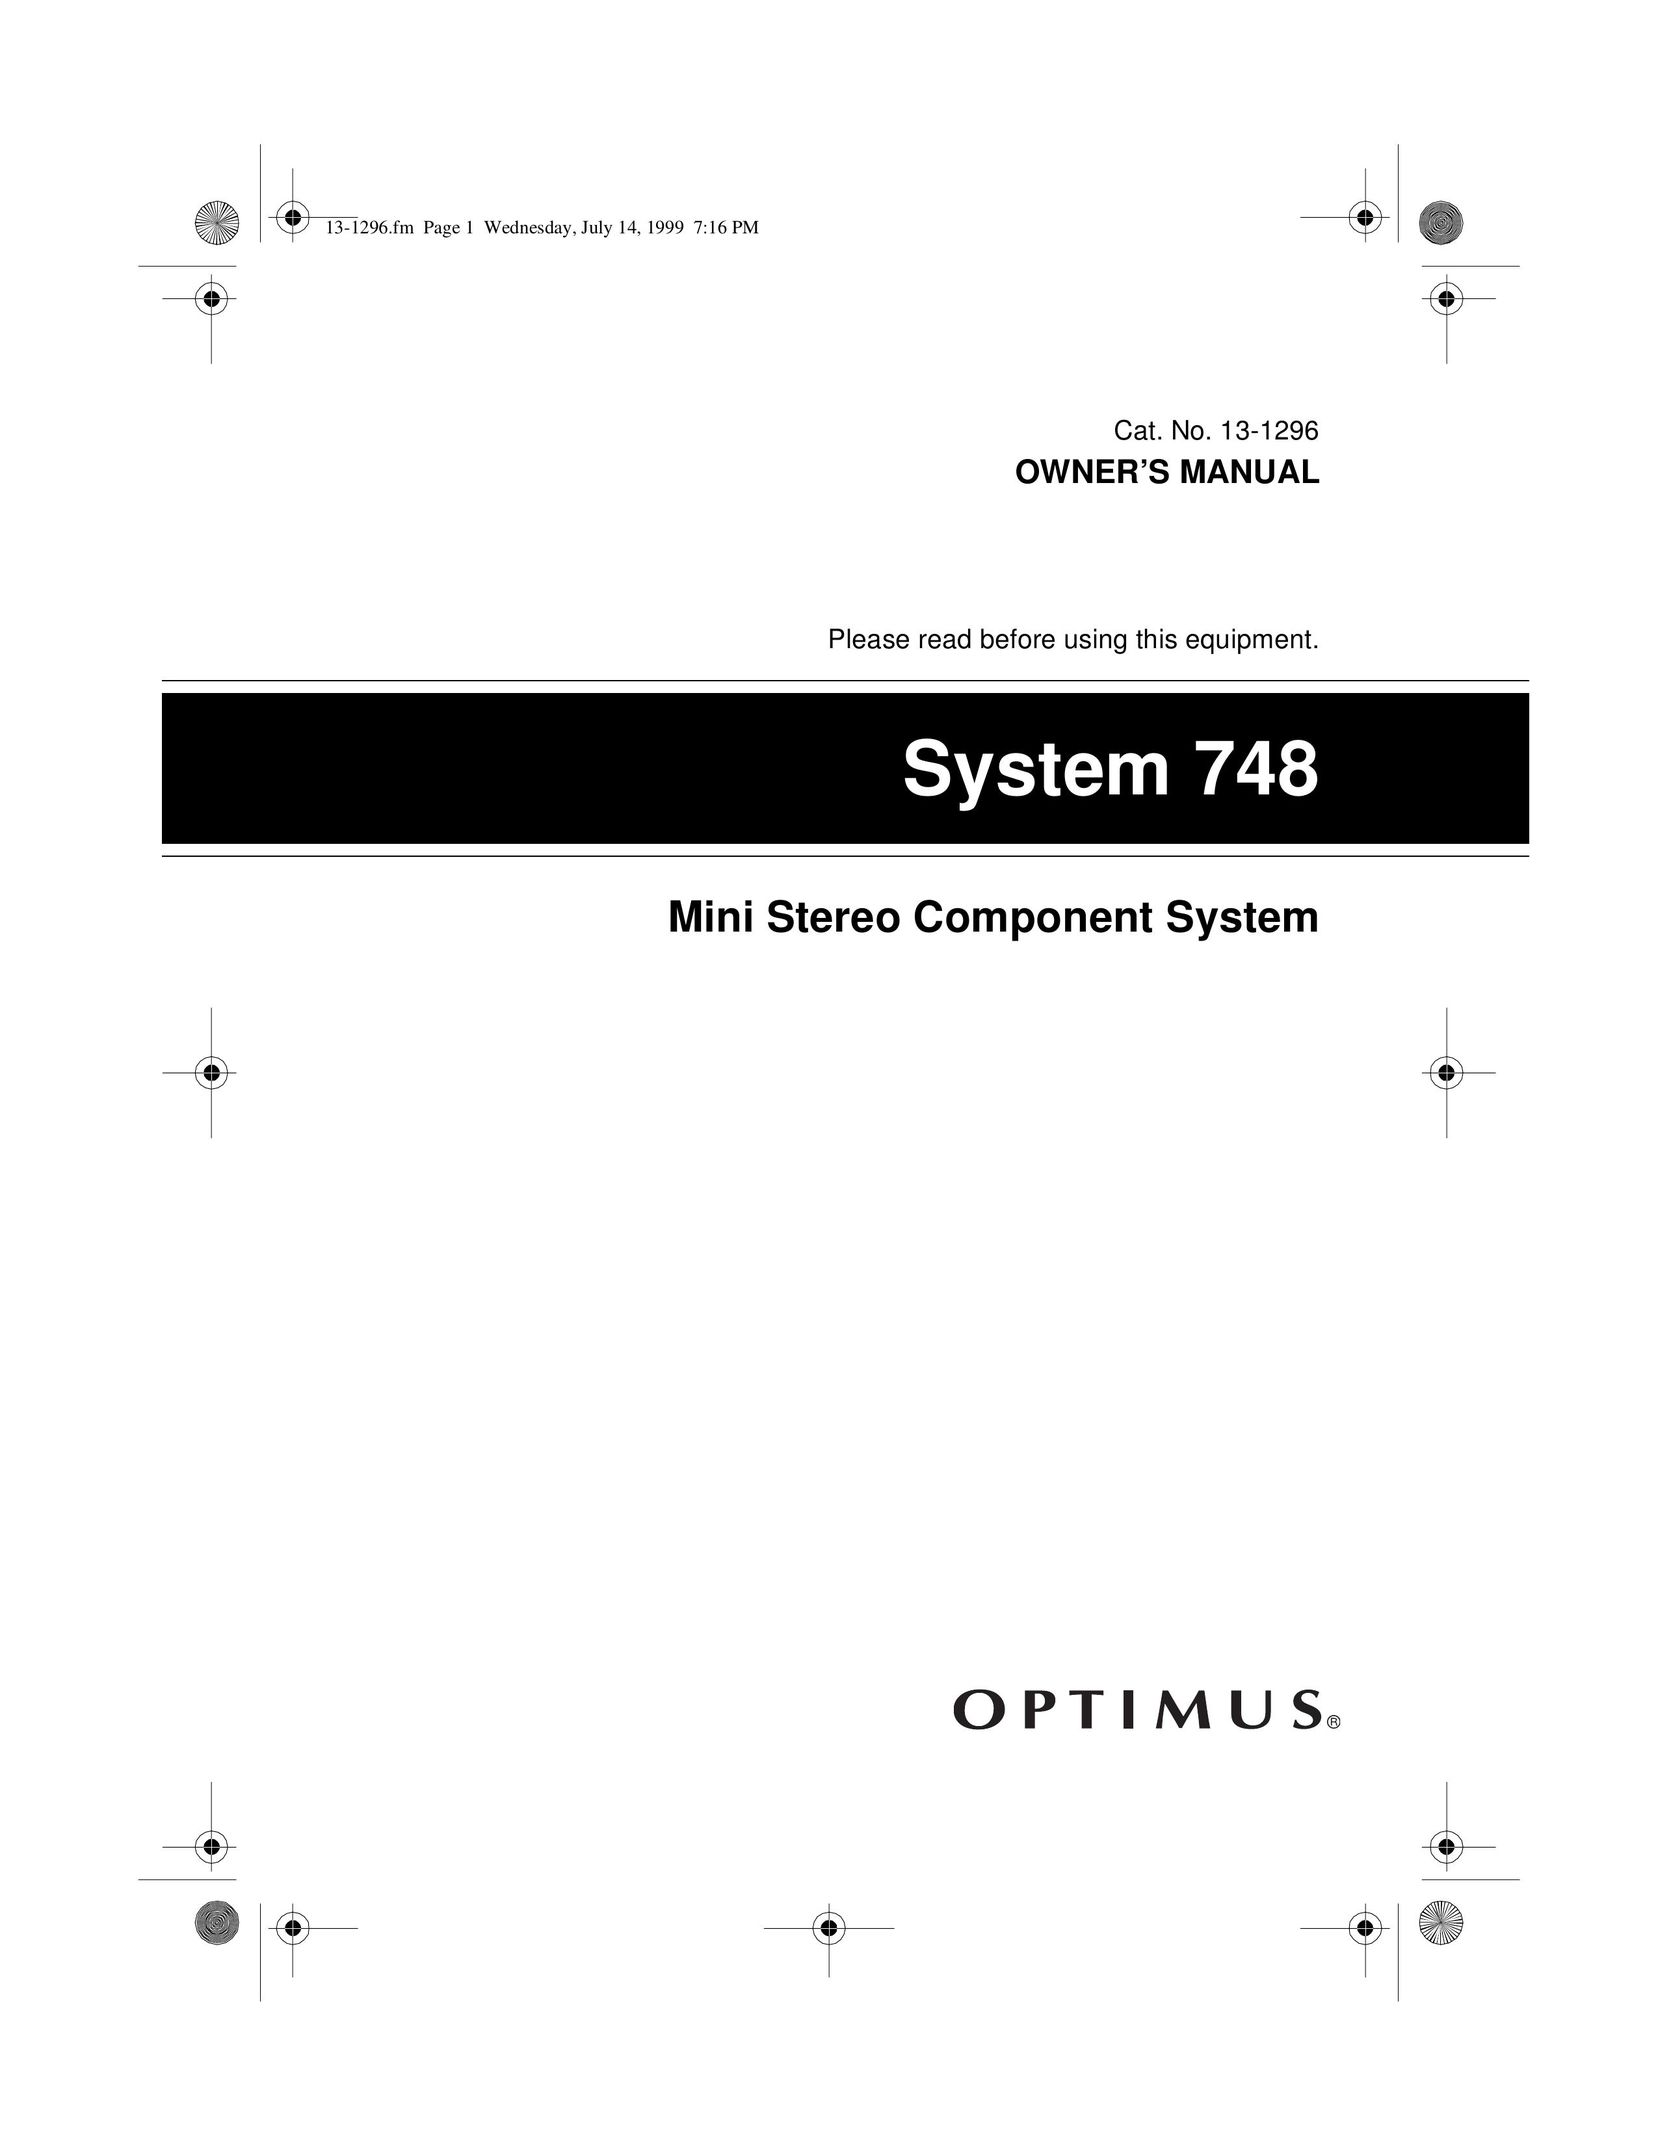 Optimus SYSTEM 748 Home Theater System User Manual